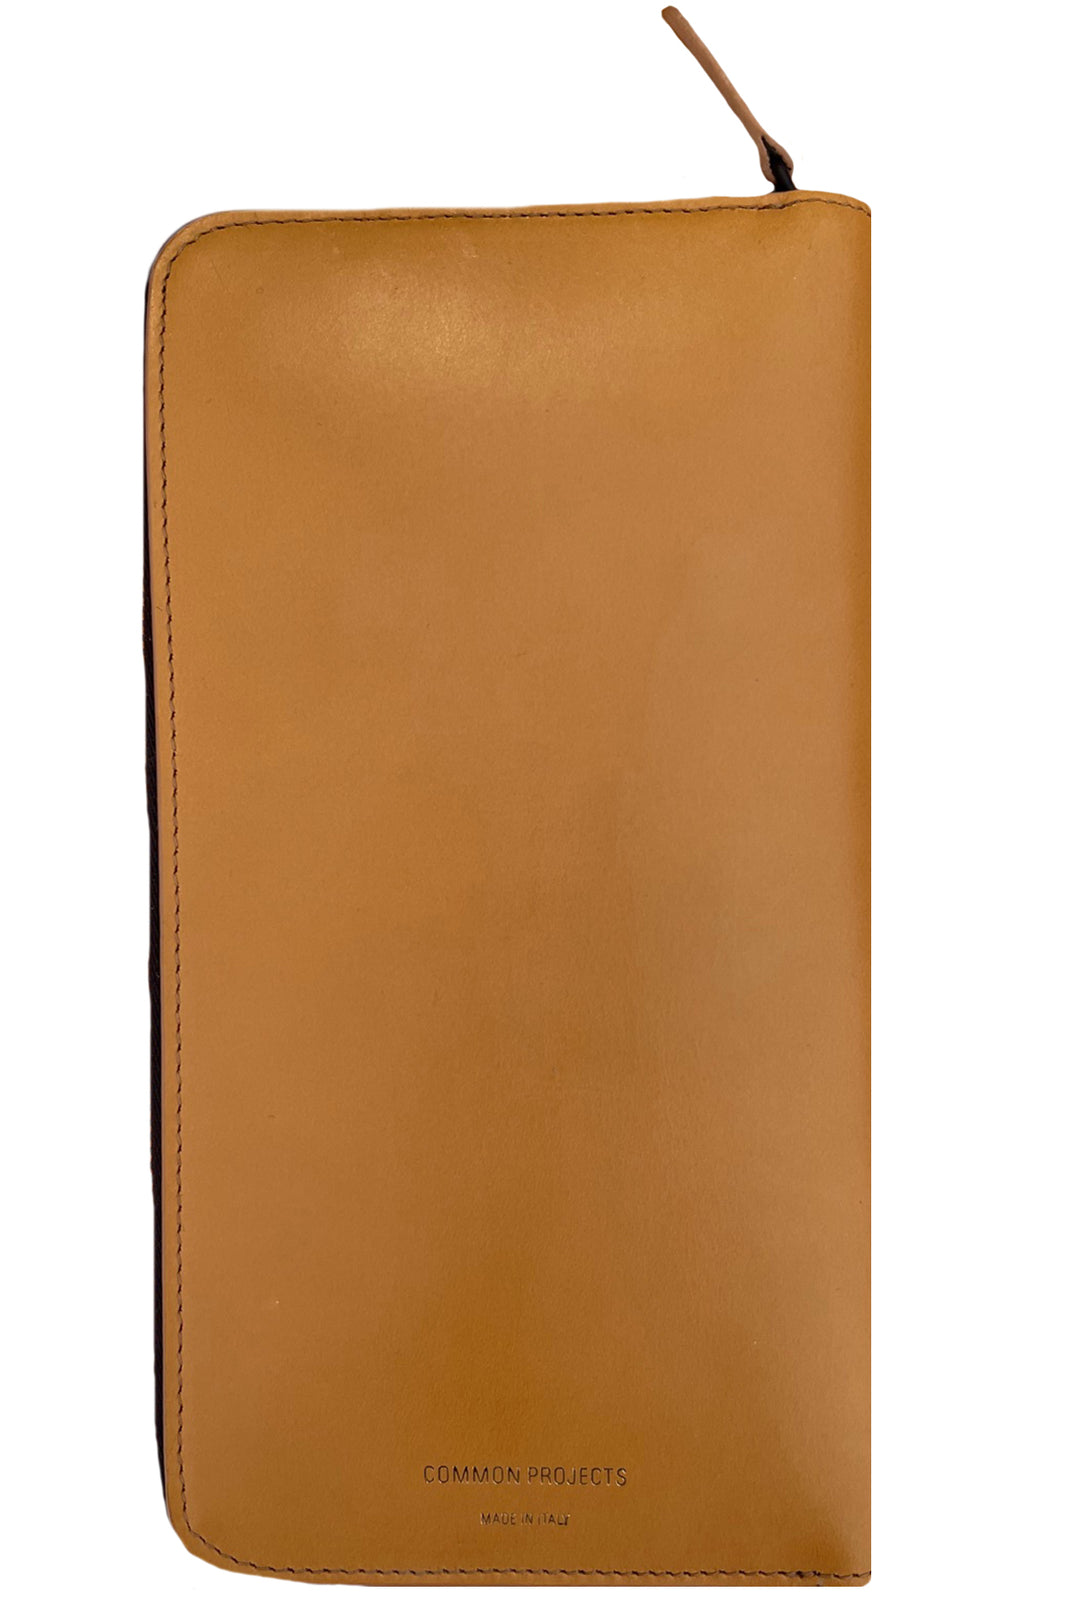 COMMON PROJECTS CONTINENTAL WALLET IN TAN